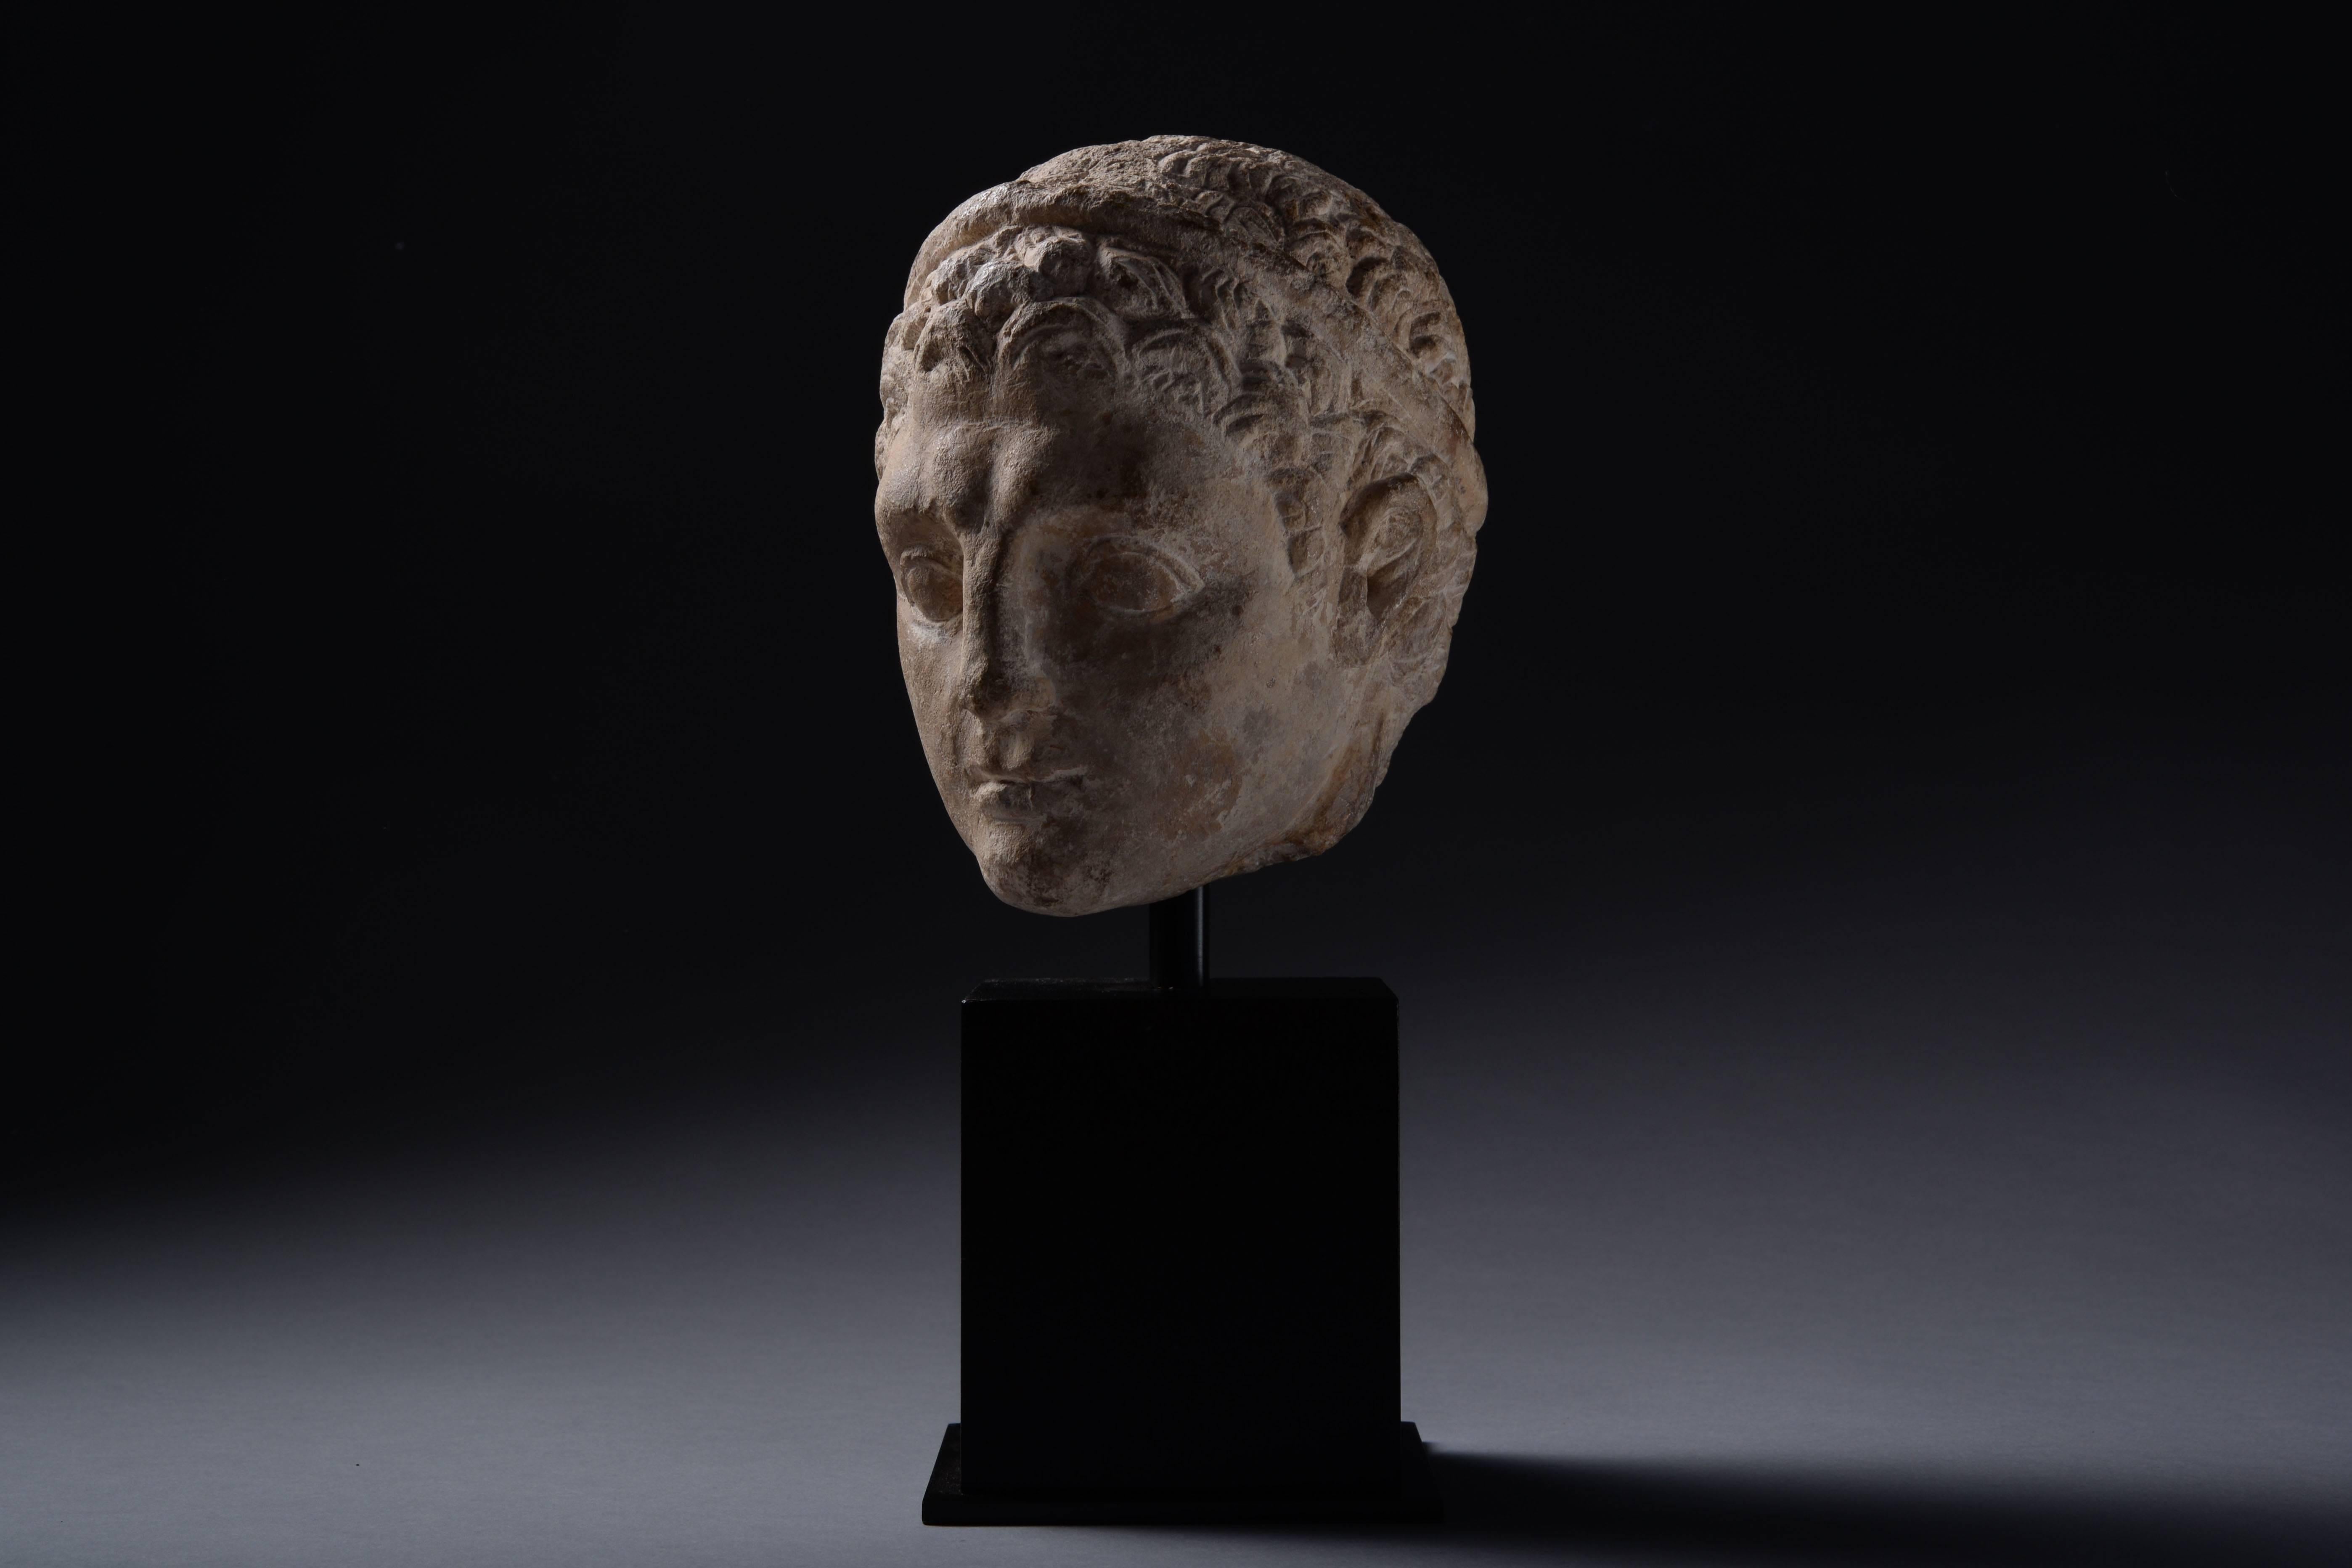 A rare and well provenanced ancient Cypriot limestone head of a Votary, dating to 350 BC.

The youthful figure is shown with diadem, curled hair and powerful features. The style is reminiscent of Greek Hellenistic sculpture, but it is carved in